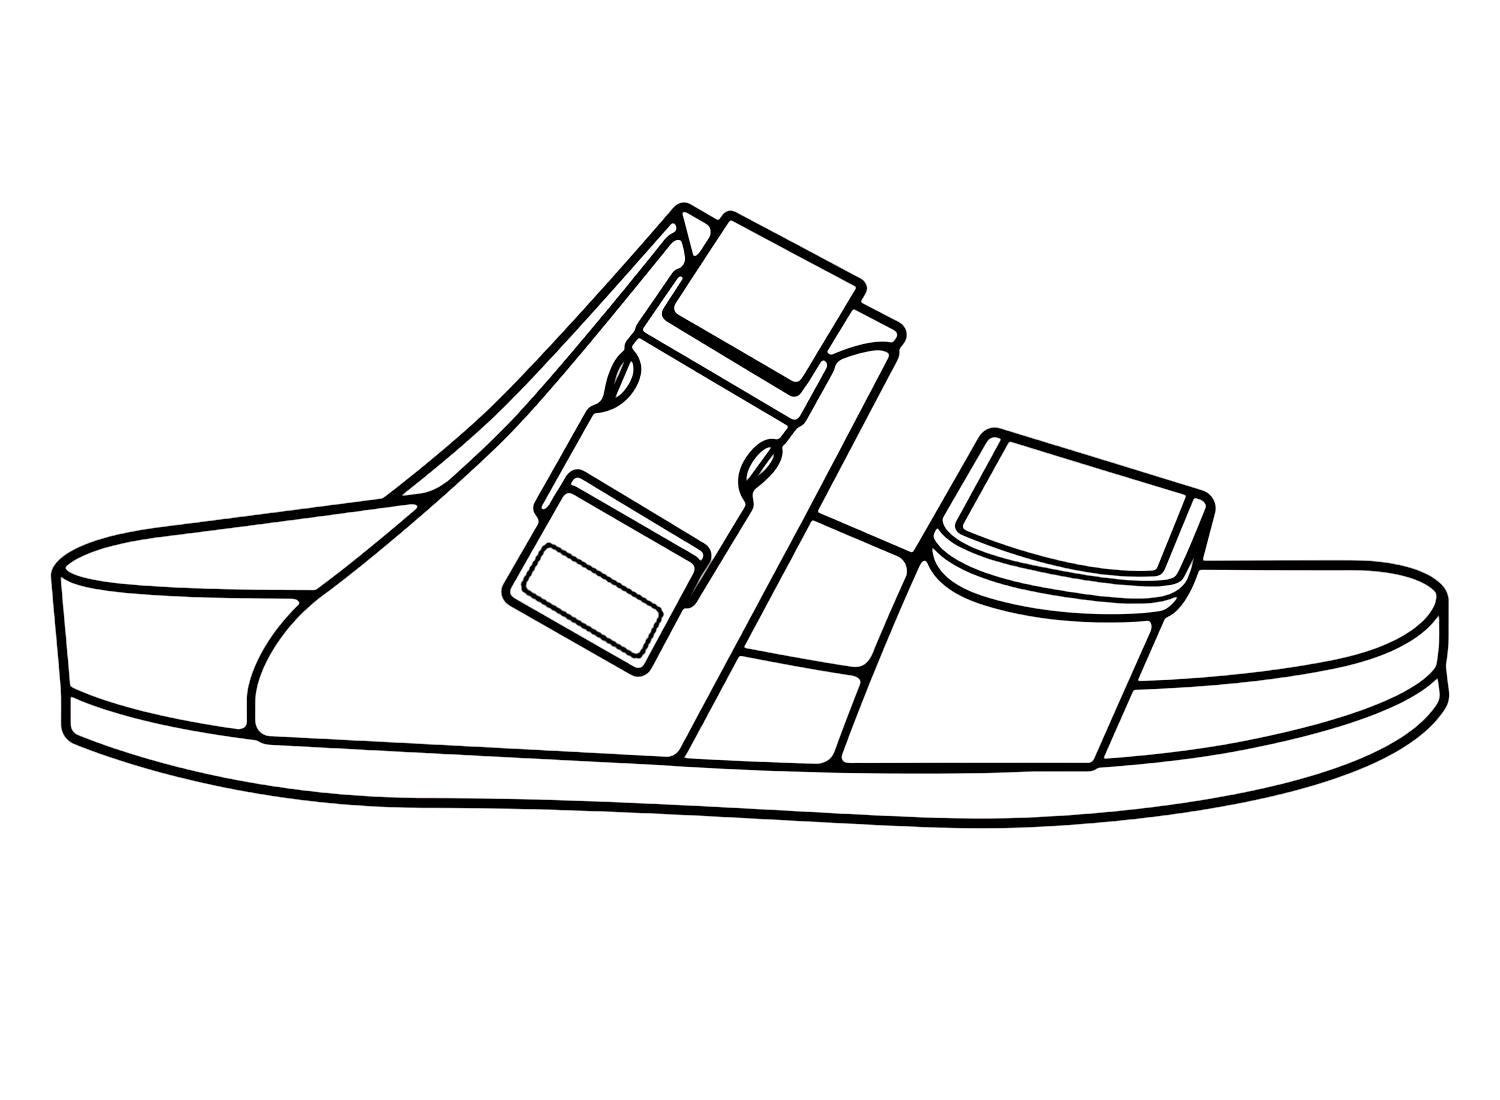 Strap Sandals Coloring Page